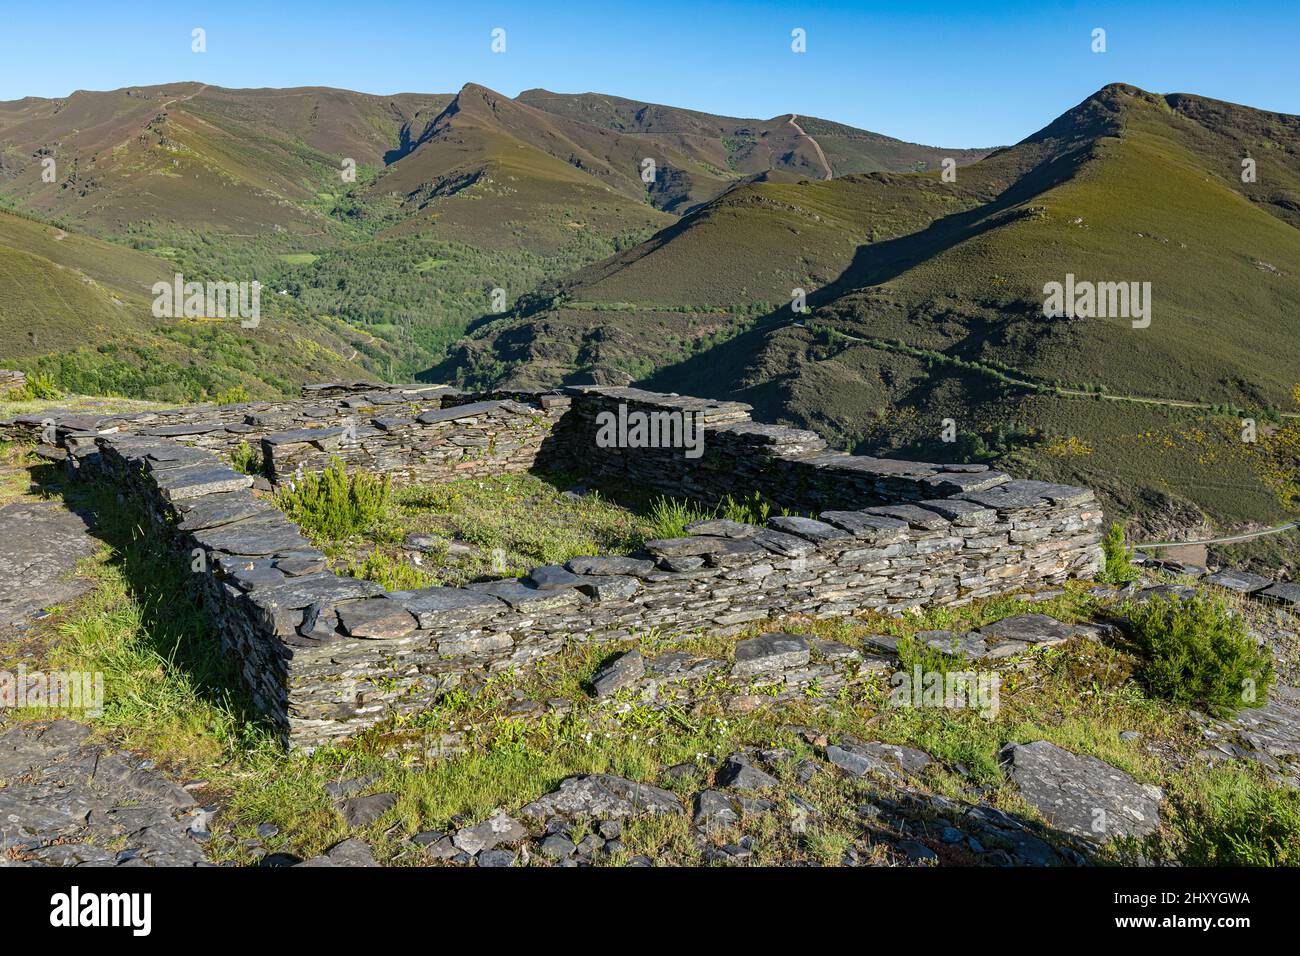 Ruins and remains of an ancient Celtic village in the O Courel mountains in Galicia, Spain Stock Photo